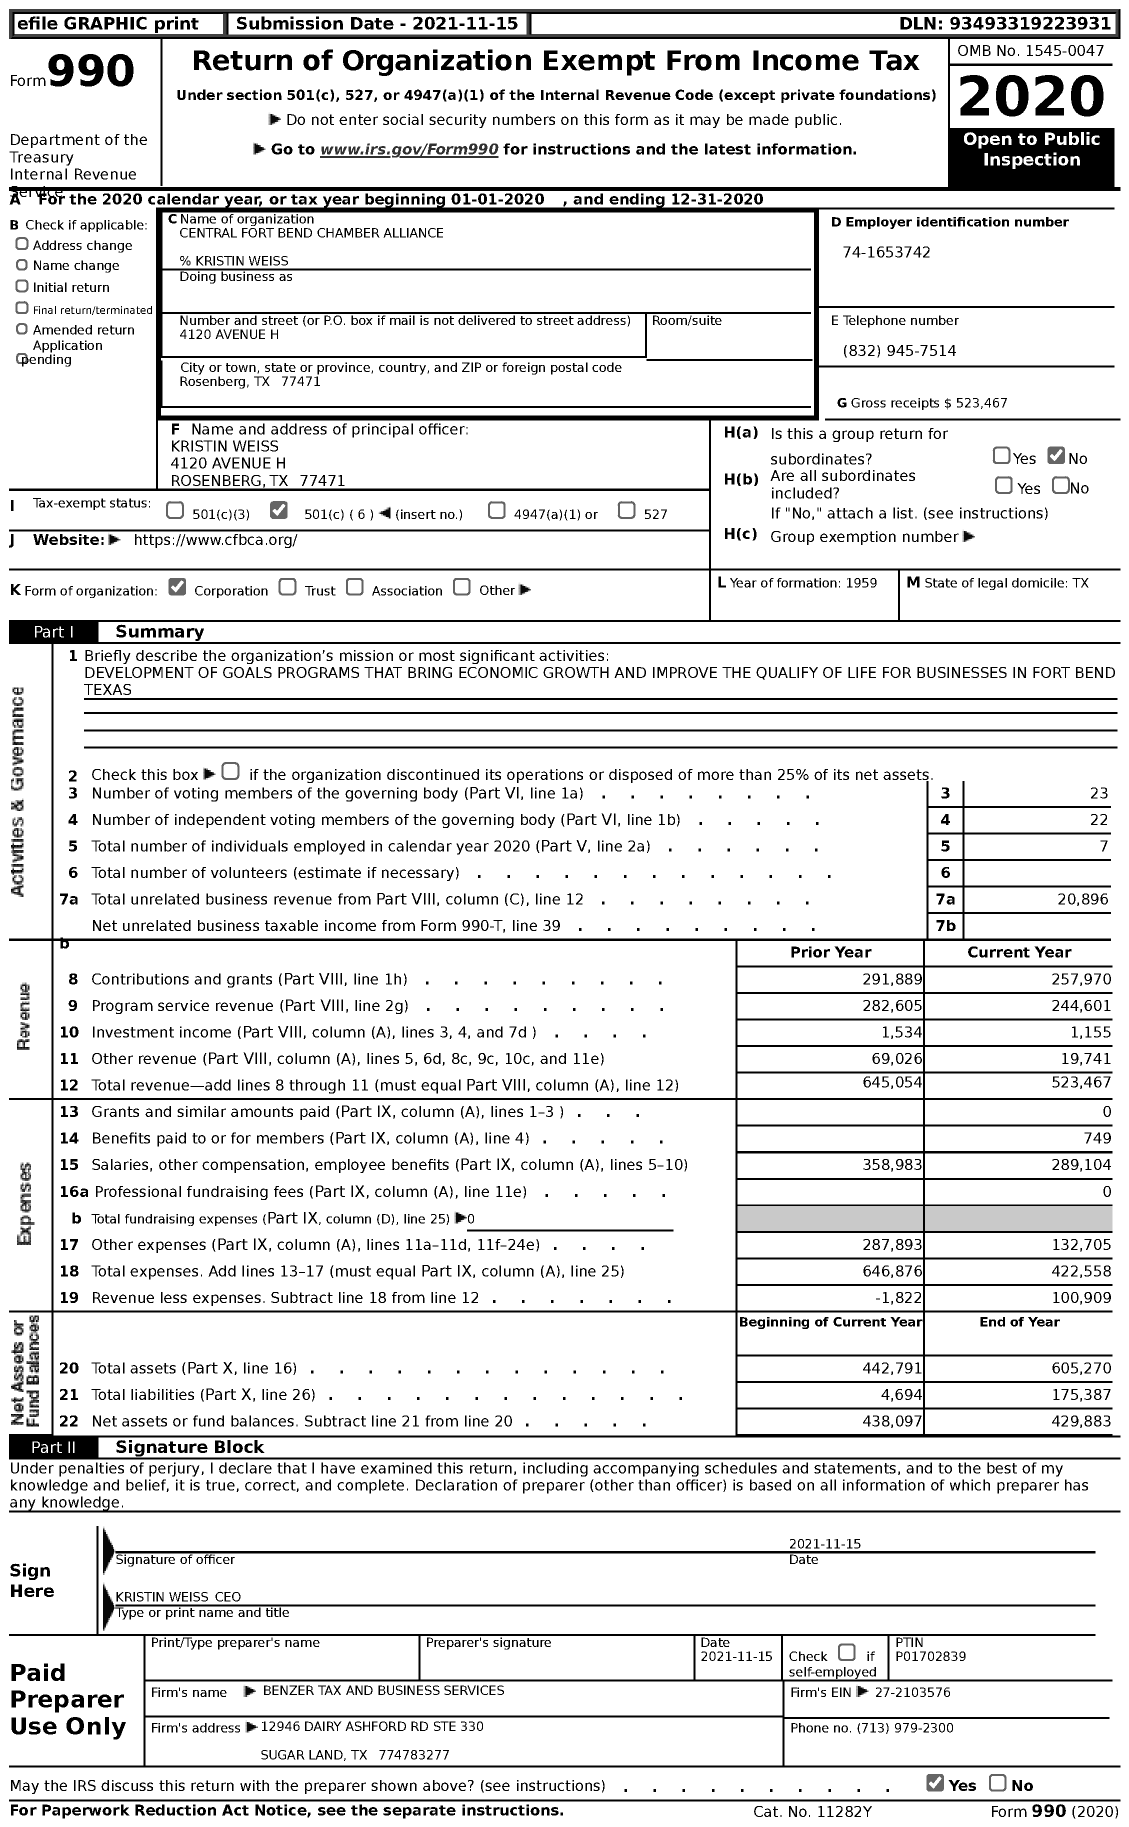 Image of first page of 2020 Form 990 for Central Fort Bend Chamber Alliance